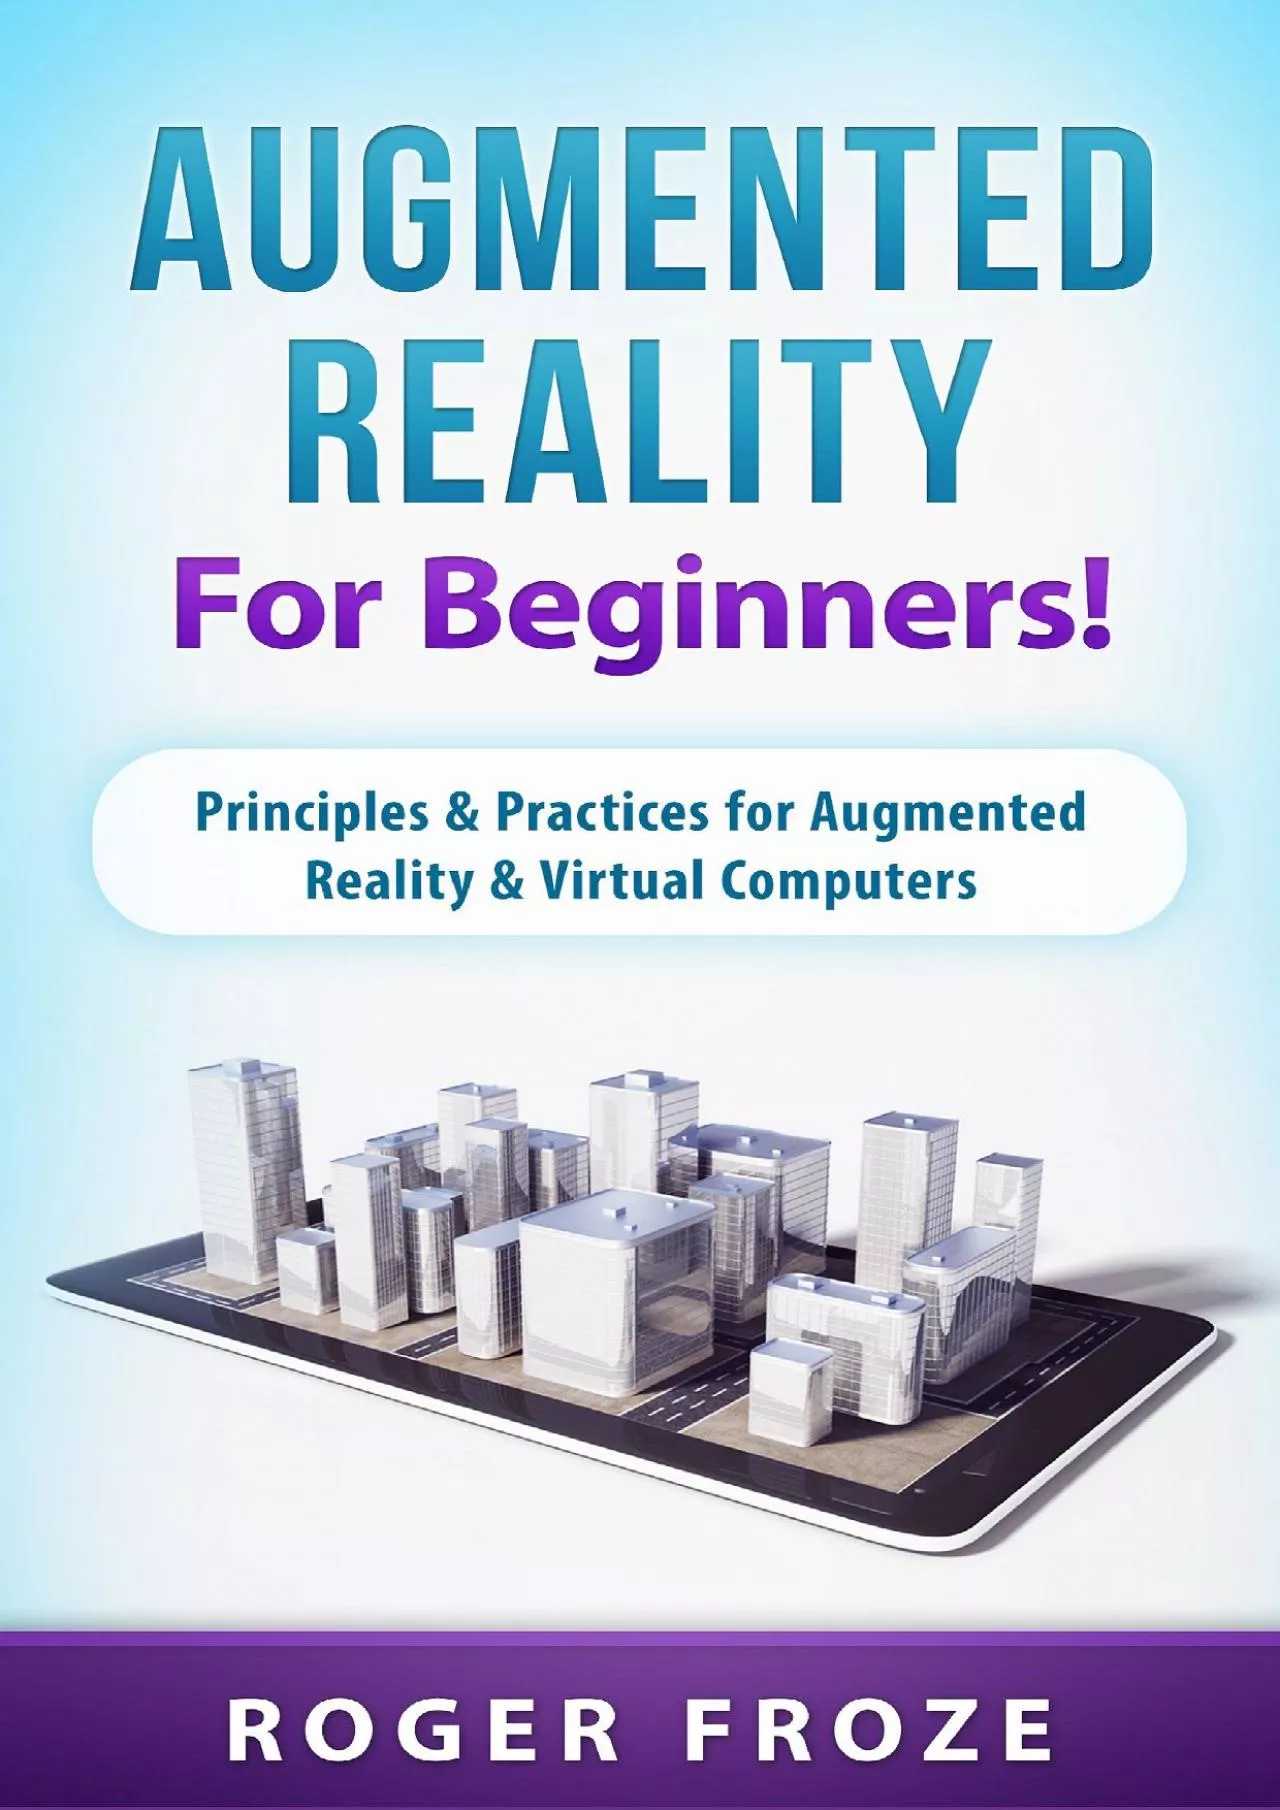 (EBOOK)-Augmented Reality for Beginners! Principles & Practices for Augmented Reality